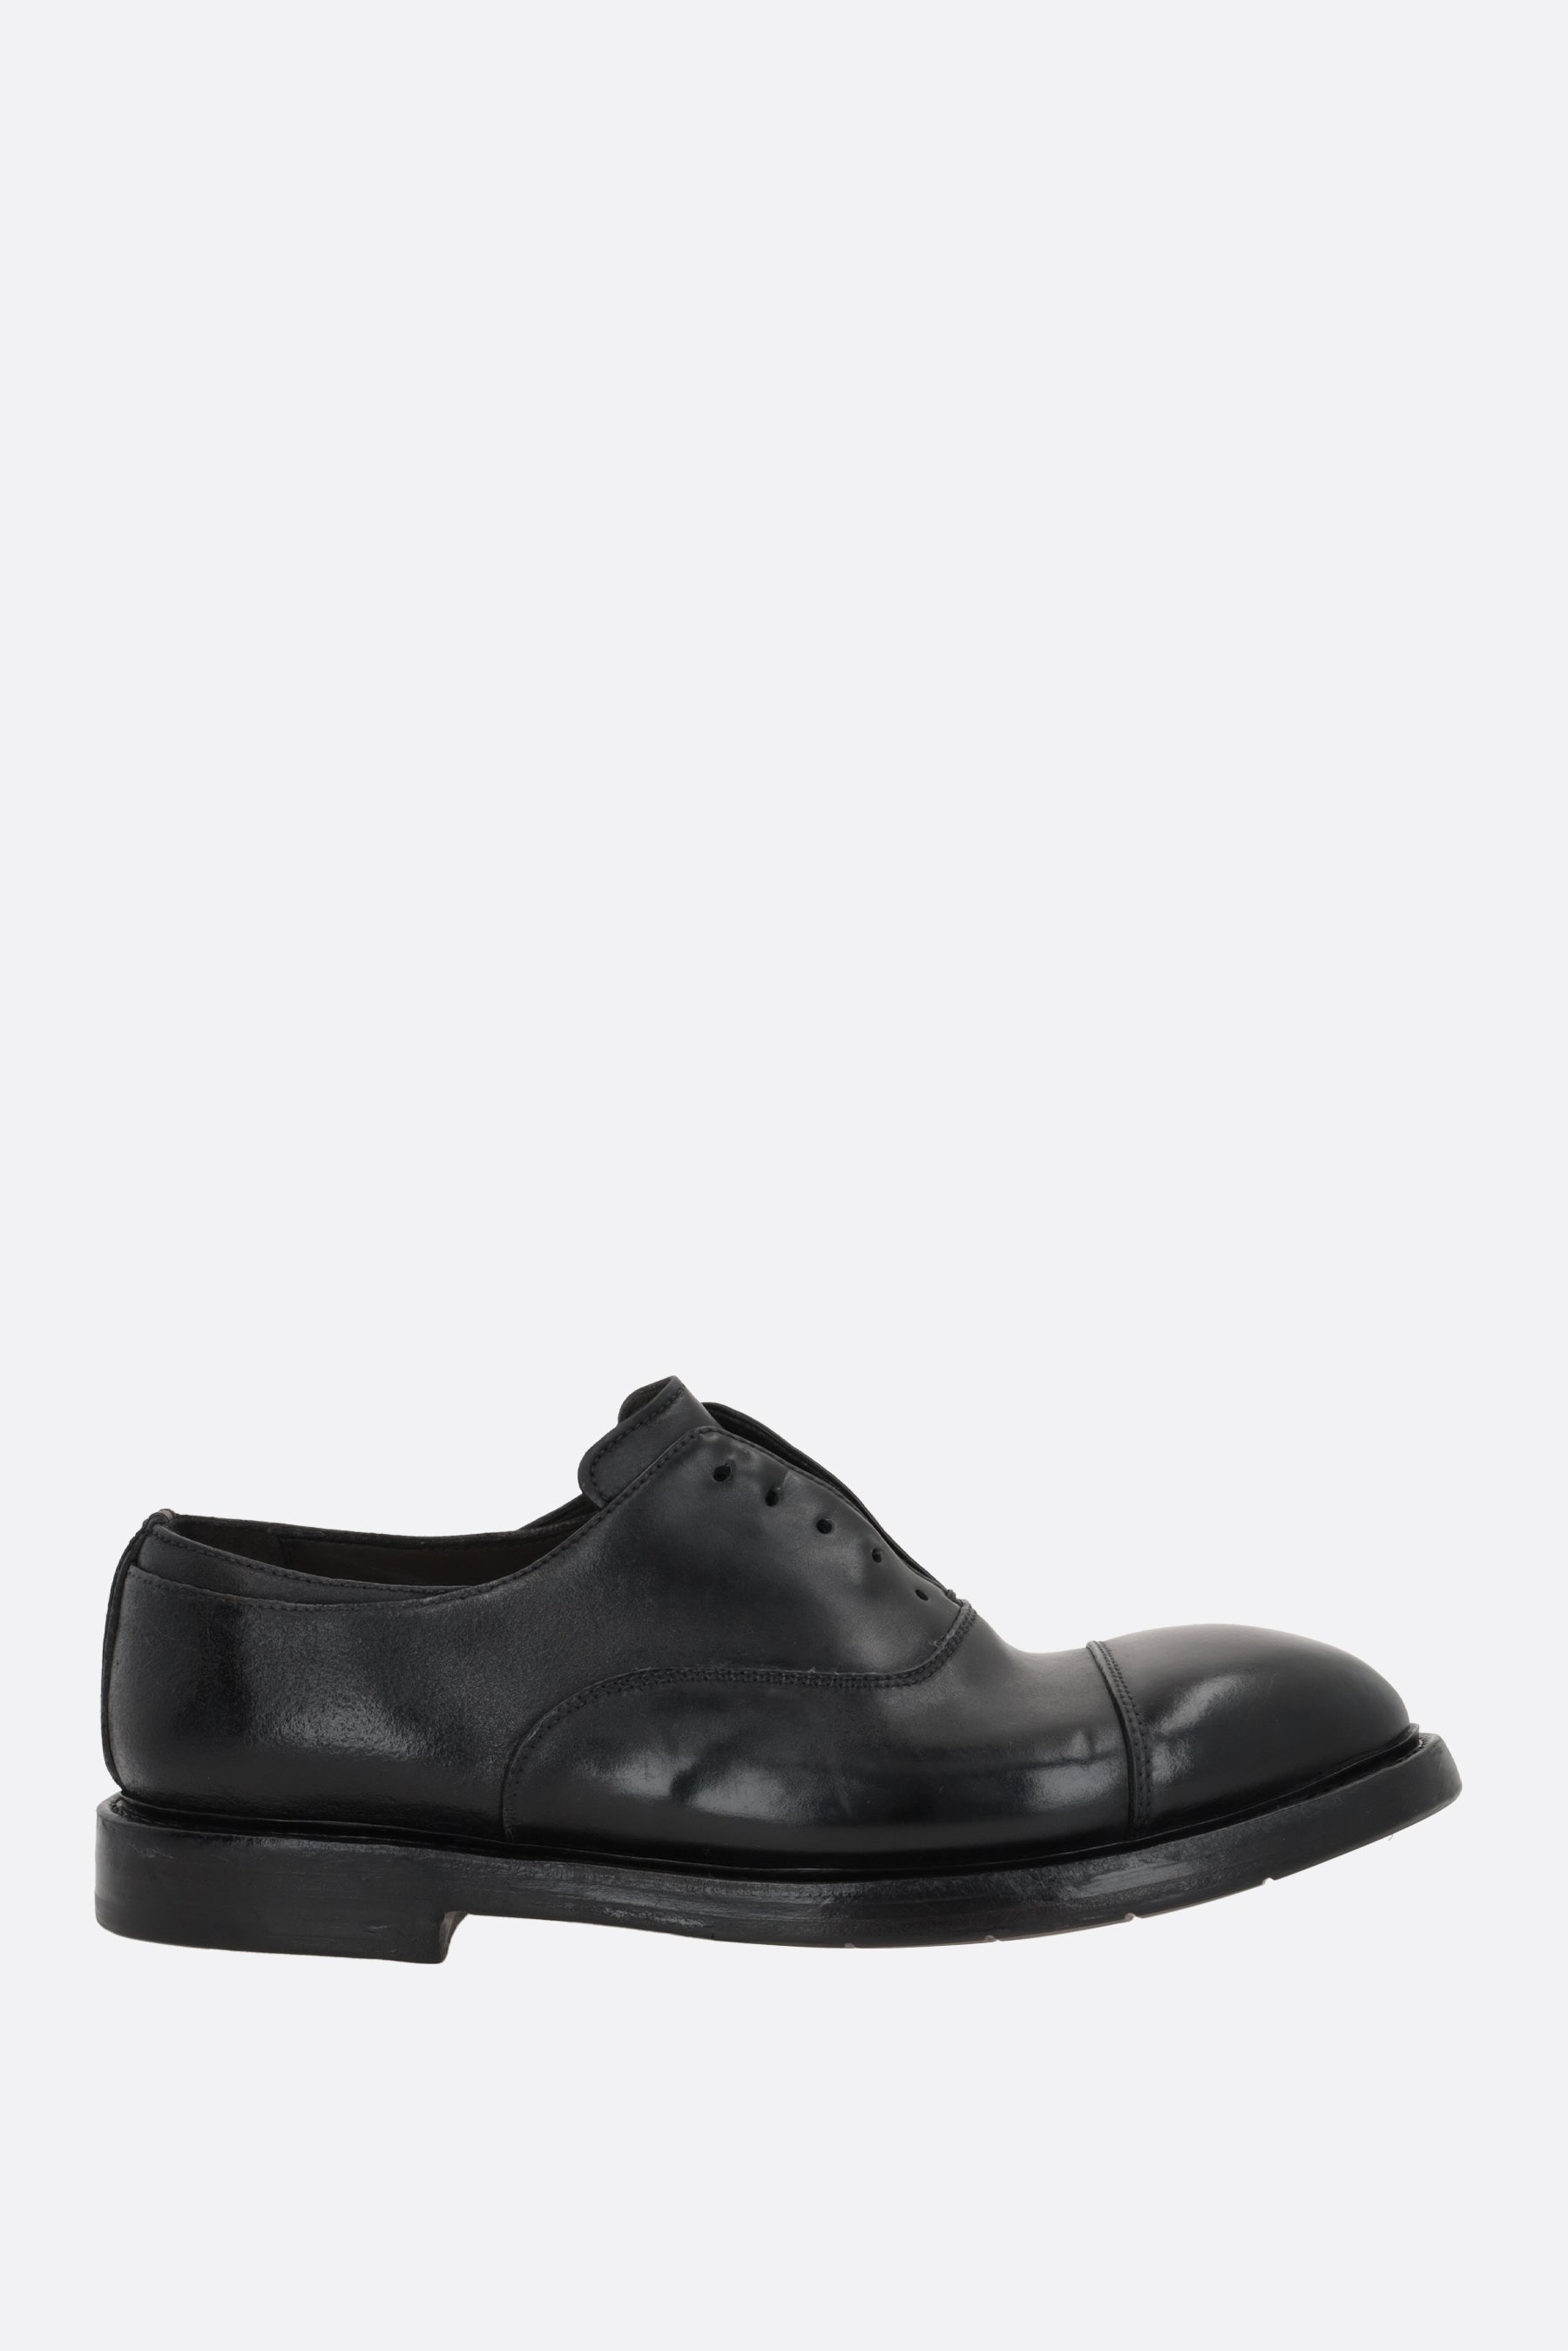 smooth leather slip-on shoes